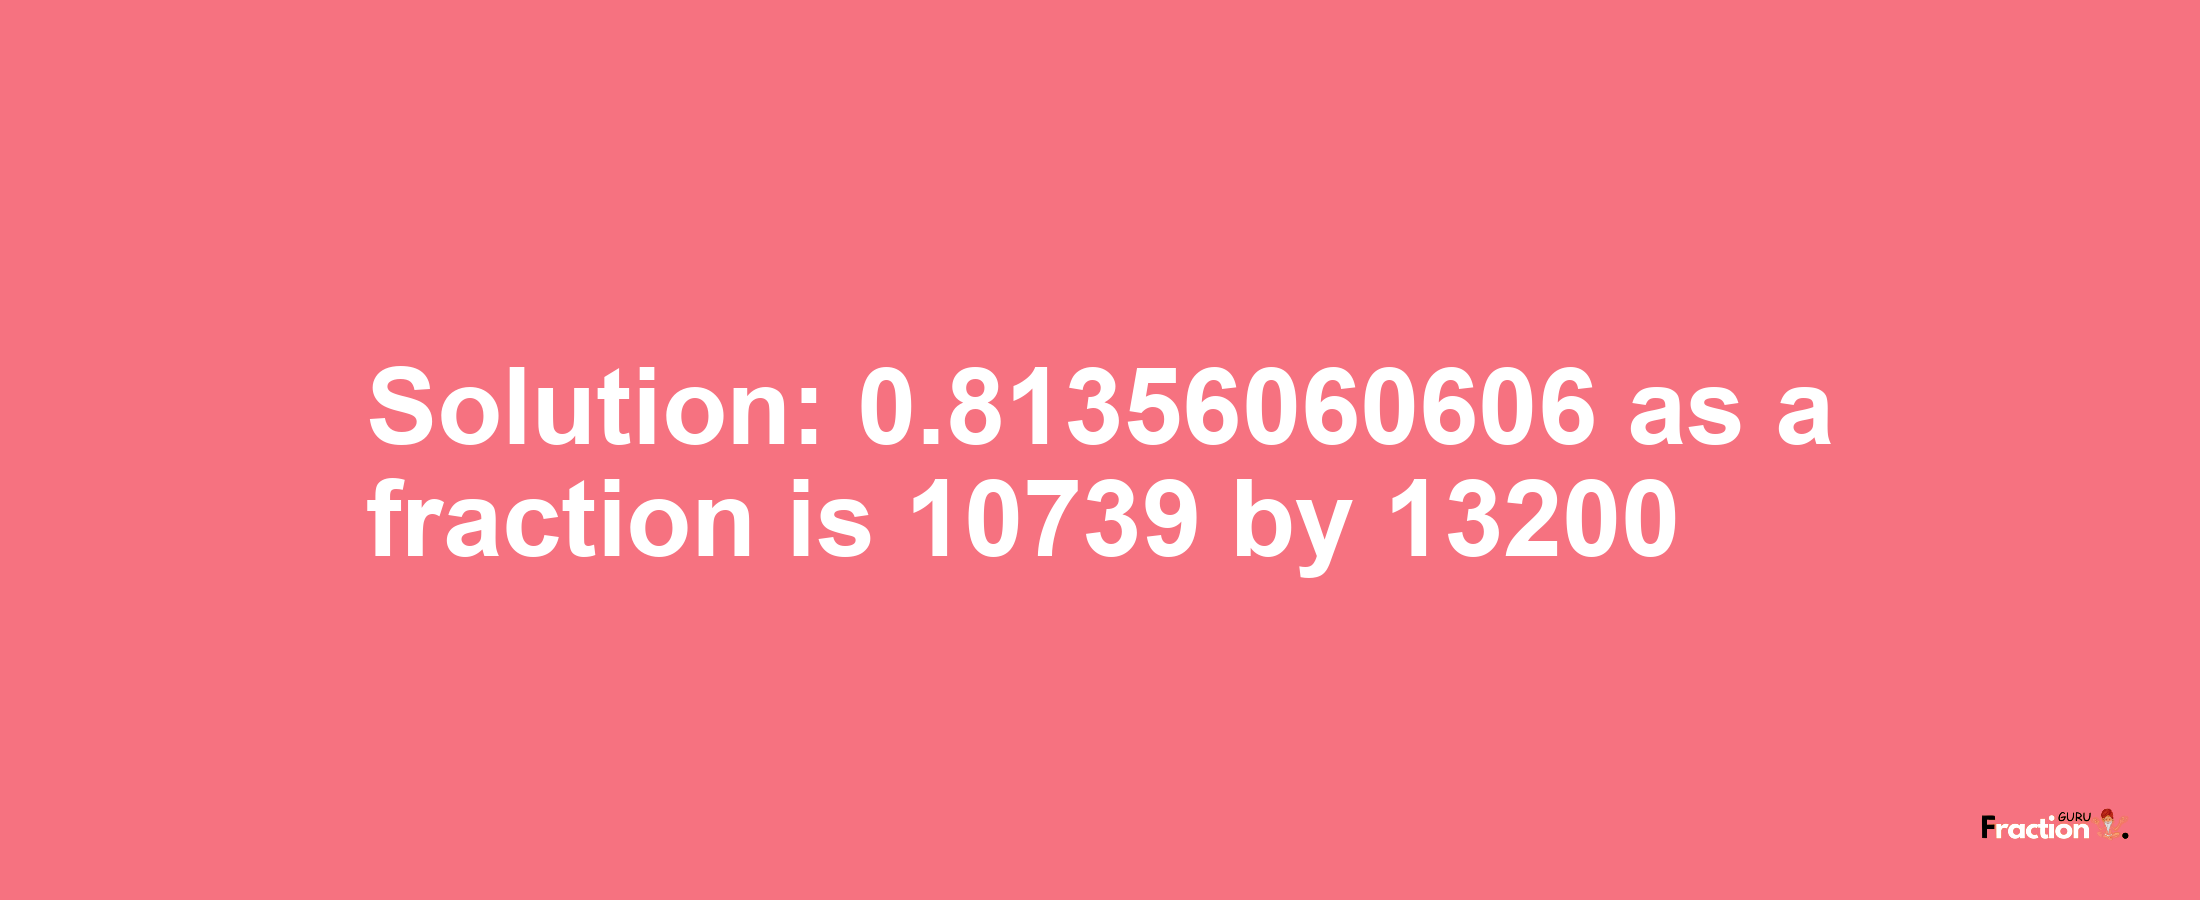 Solution:0.81356060606 as a fraction is 10739/13200